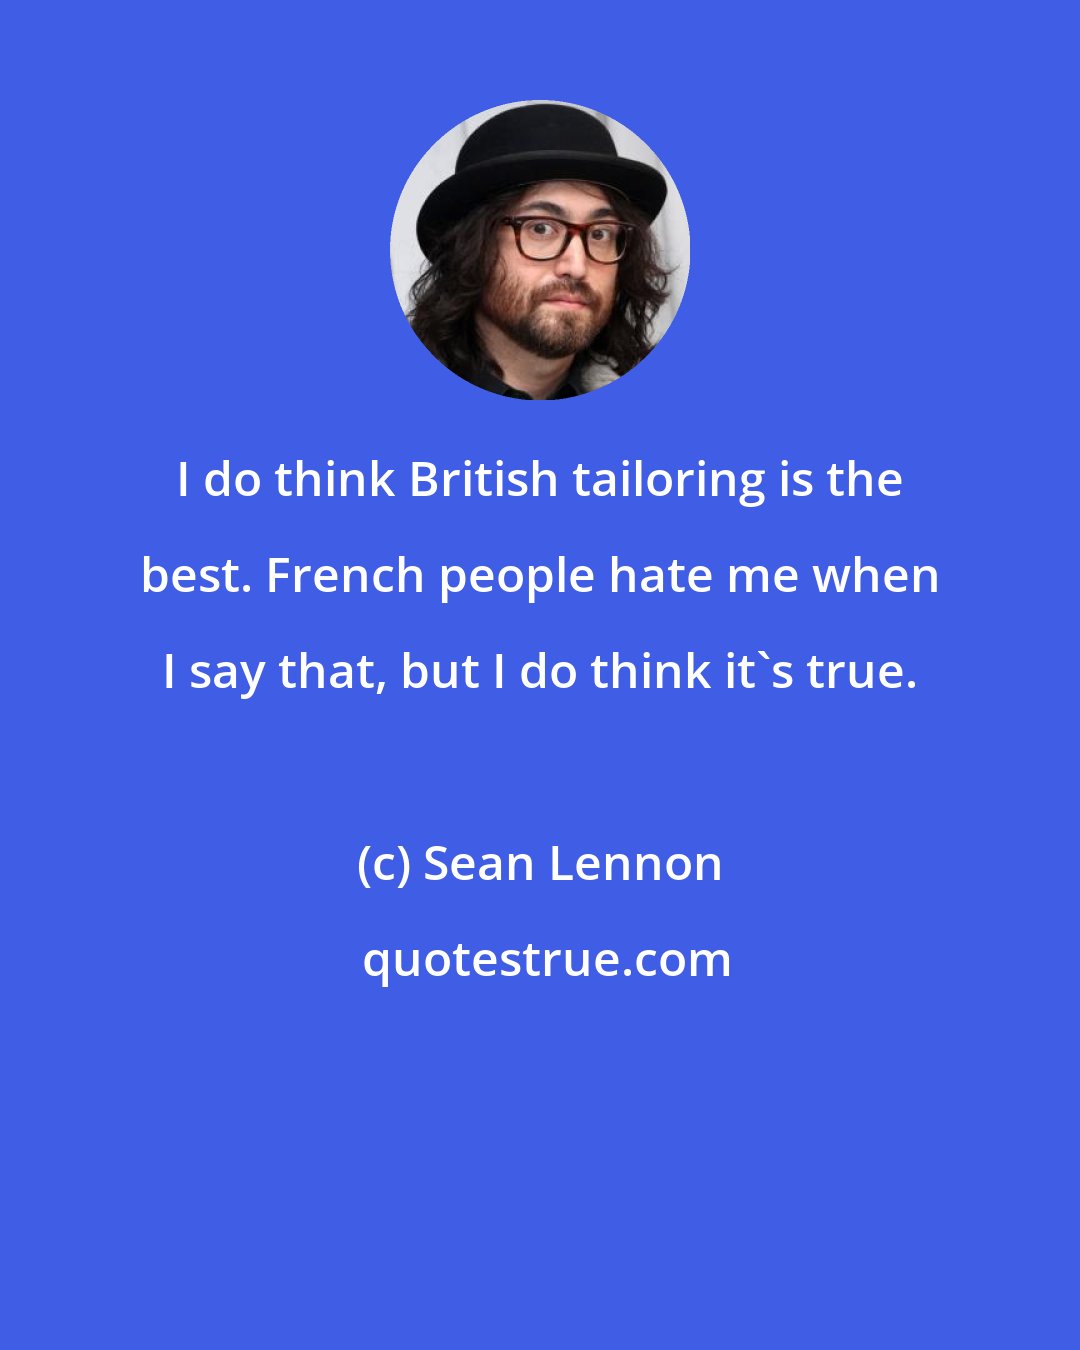 Sean Lennon: I do think British tailoring is the best. French people hate me when I say that, but I do think it's true.